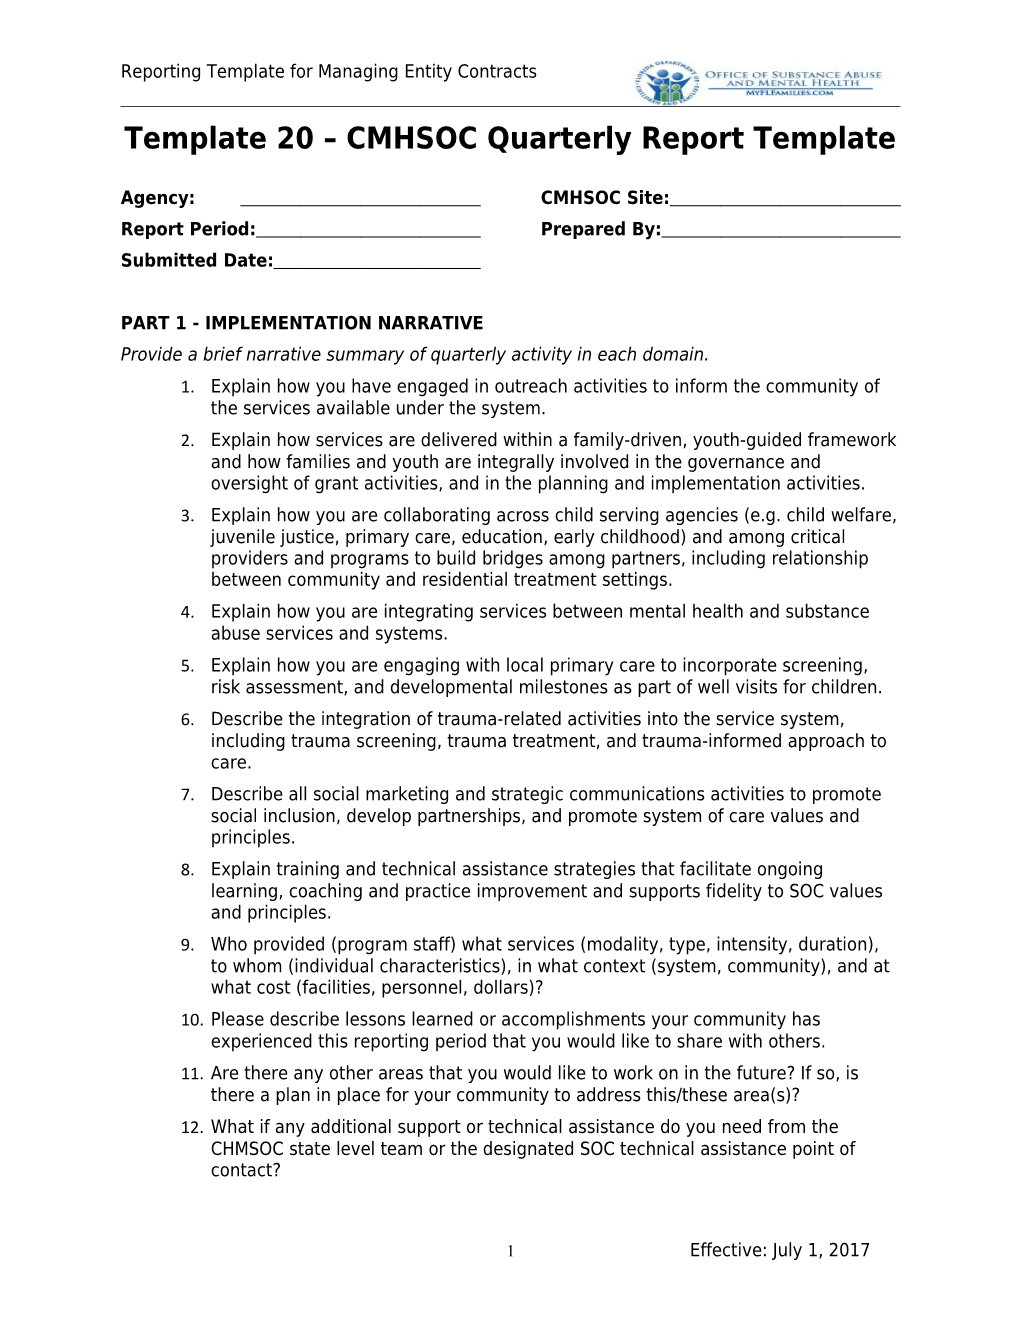 Template 20 CMHSOC Quarterly Report Template